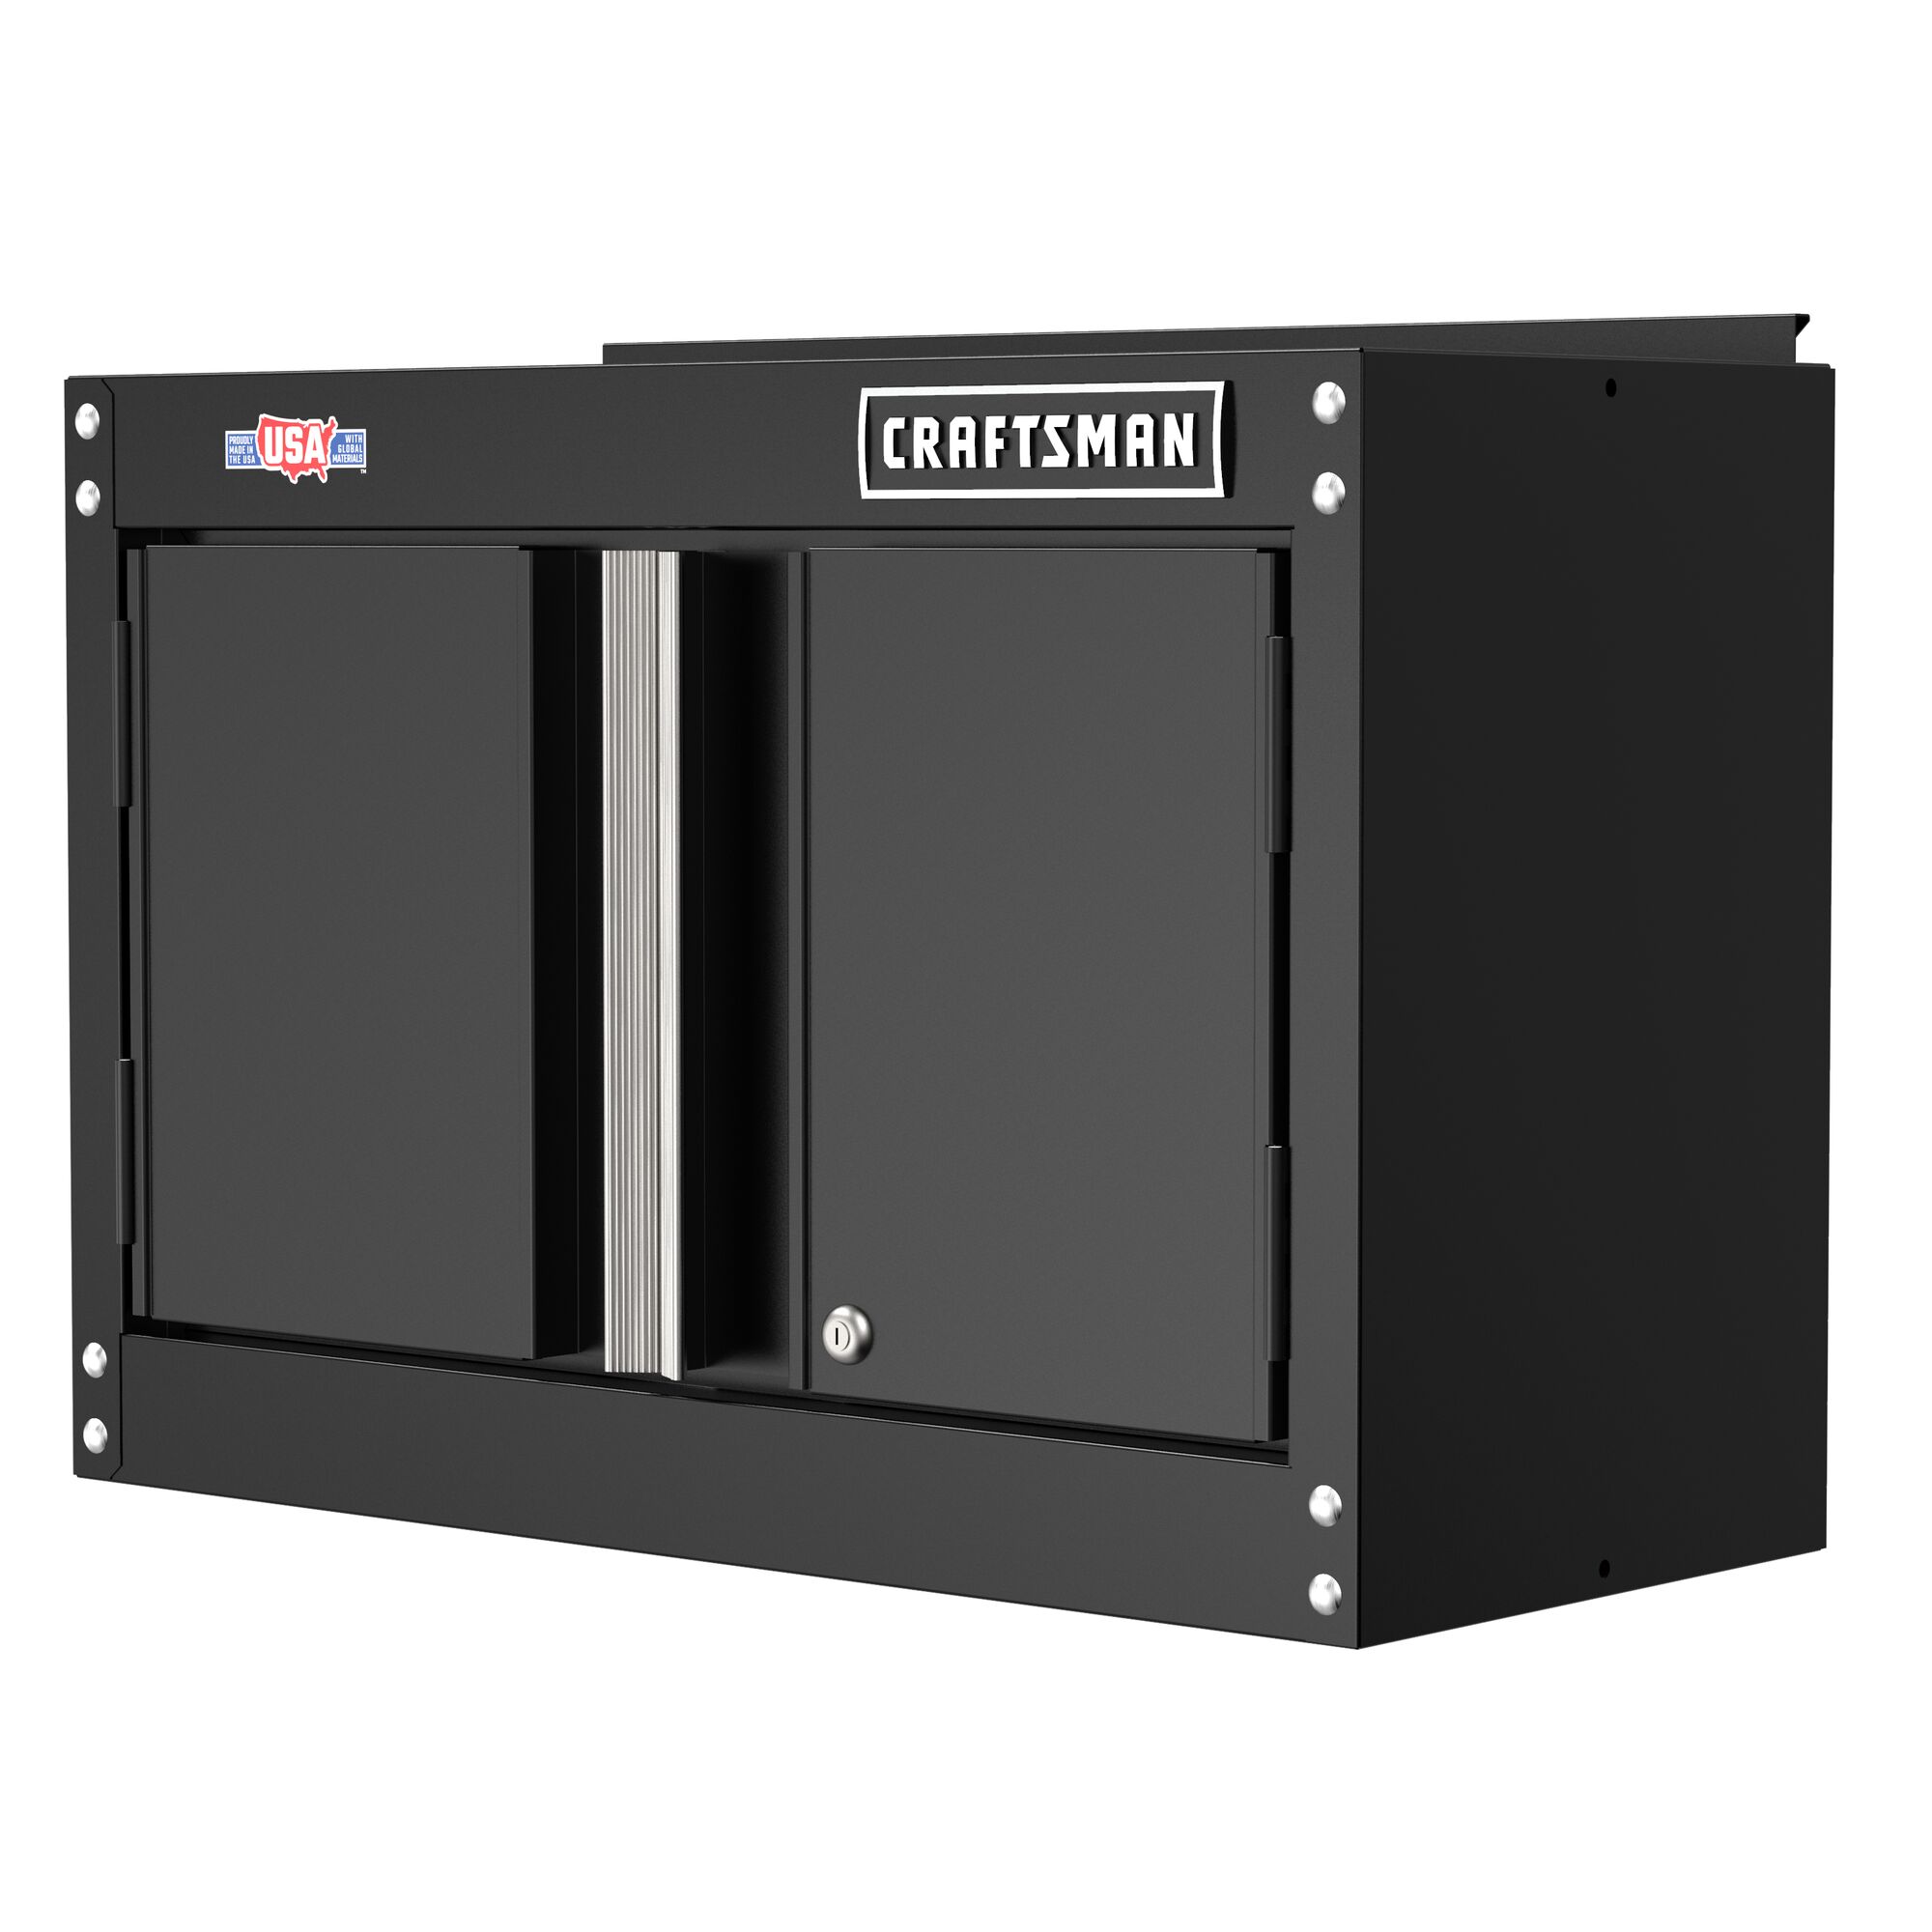 CRAFTSMAN 28-in wide by 18-in high storage wall cabinet angled left view